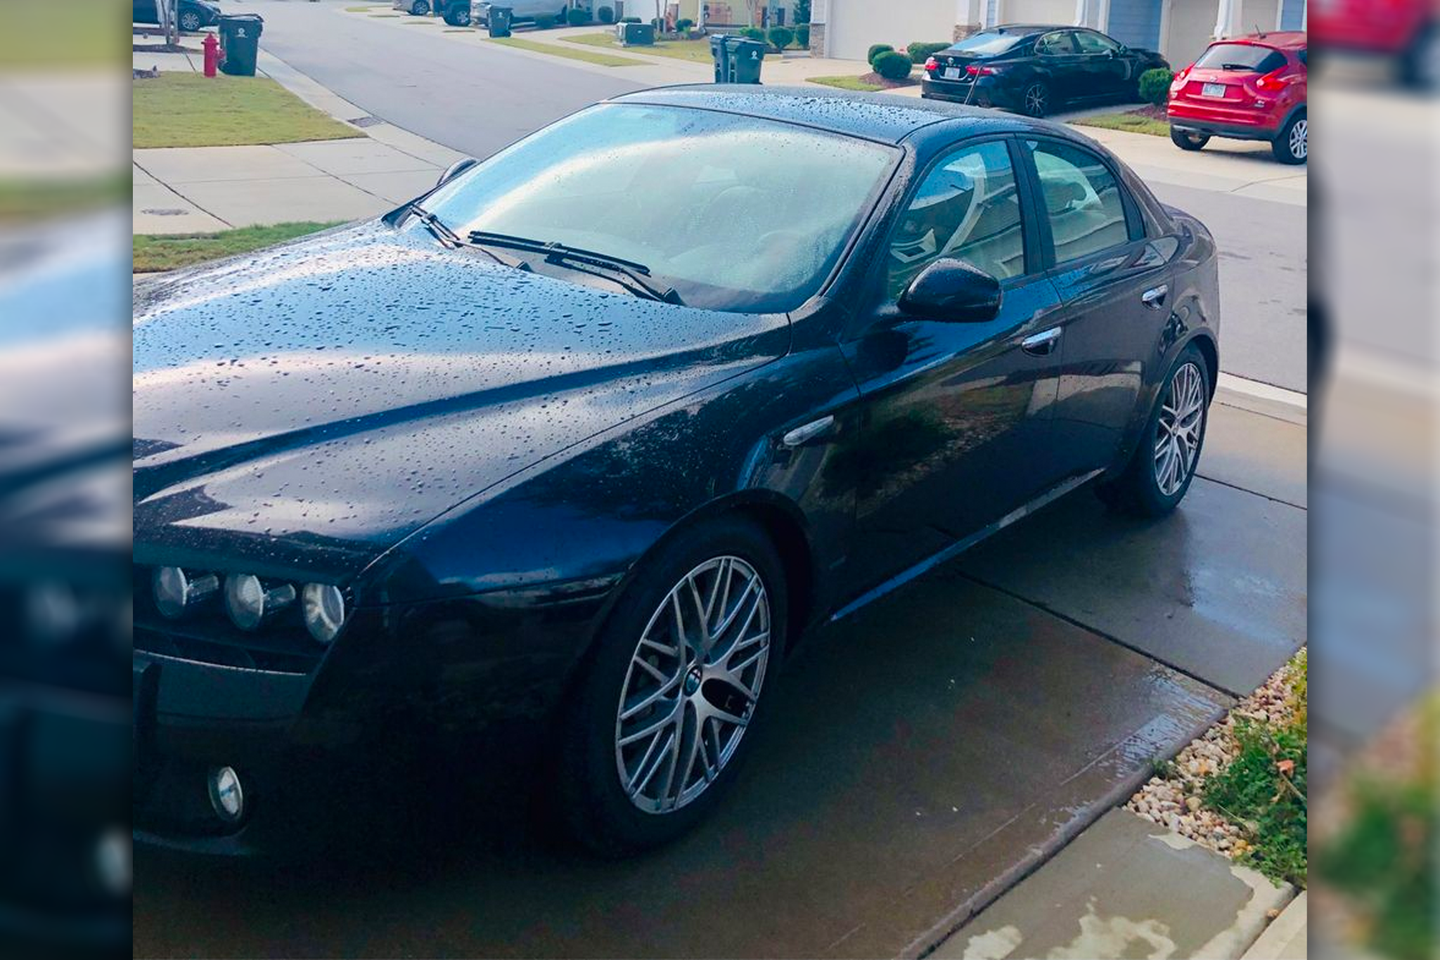 Supposedly Legal 2009 Alfa Romeo 159 For Sale Could Be Your Best Worst  Decision